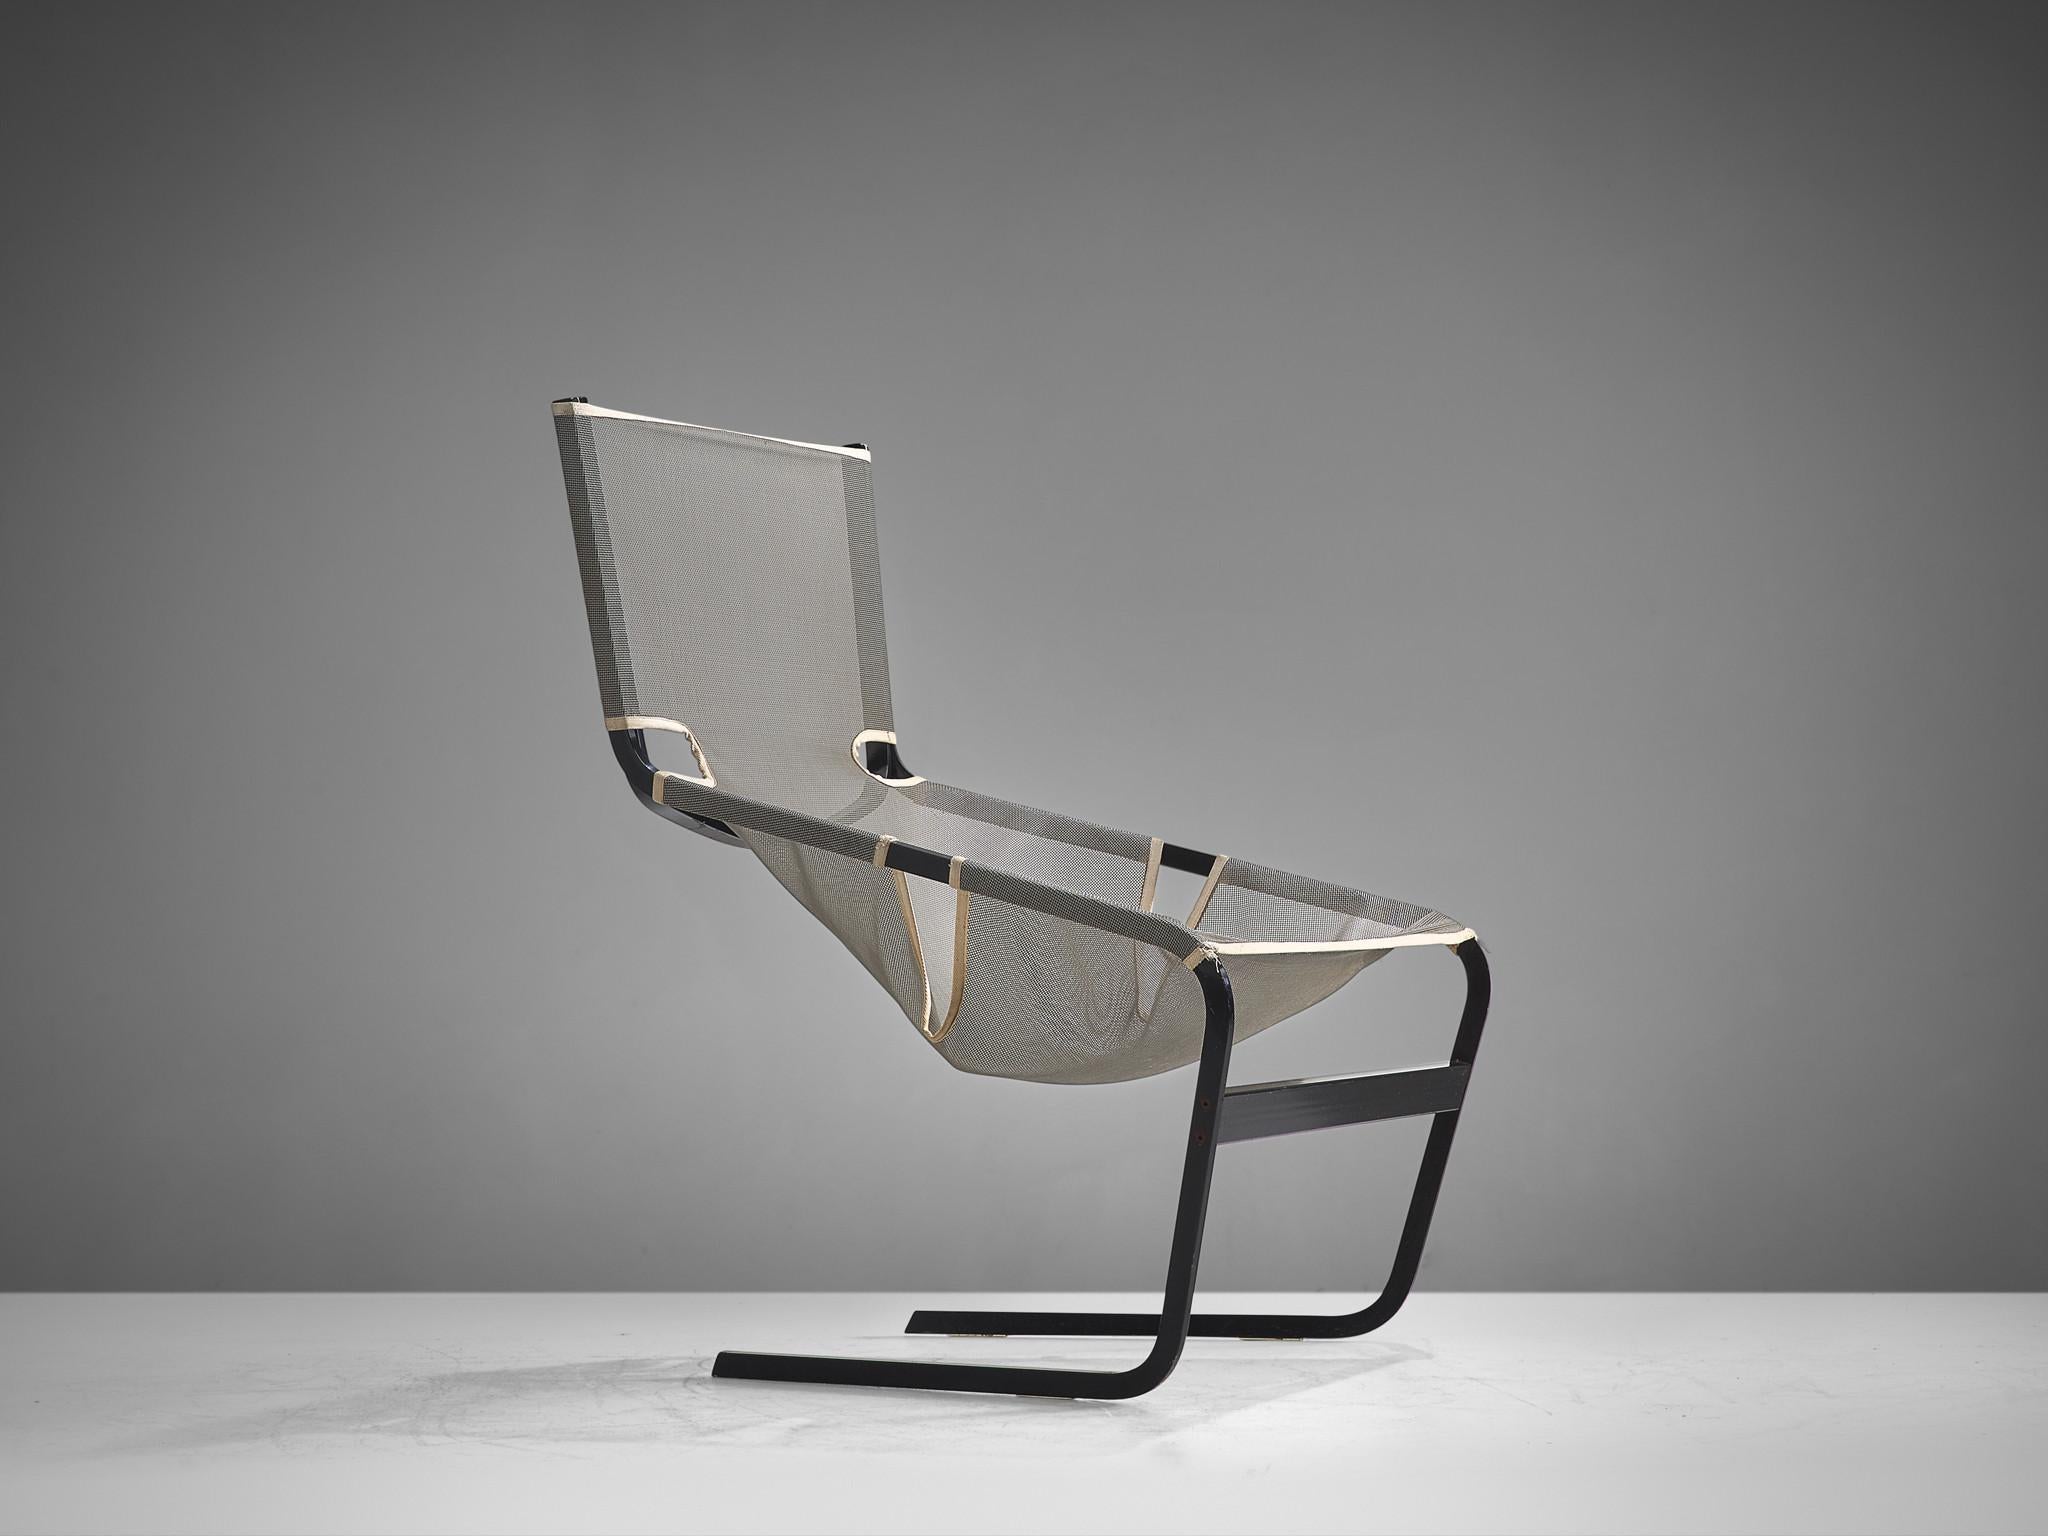 Easy chair by Pierre Paulin, metal and mesh, F444, the Netherlands, circa 1962.

This mesh F-444 chair is designed by Pierre Paulin for Artifort in 1962. This chair shows sharp lines and features an angled open seat that features as a floating seat.